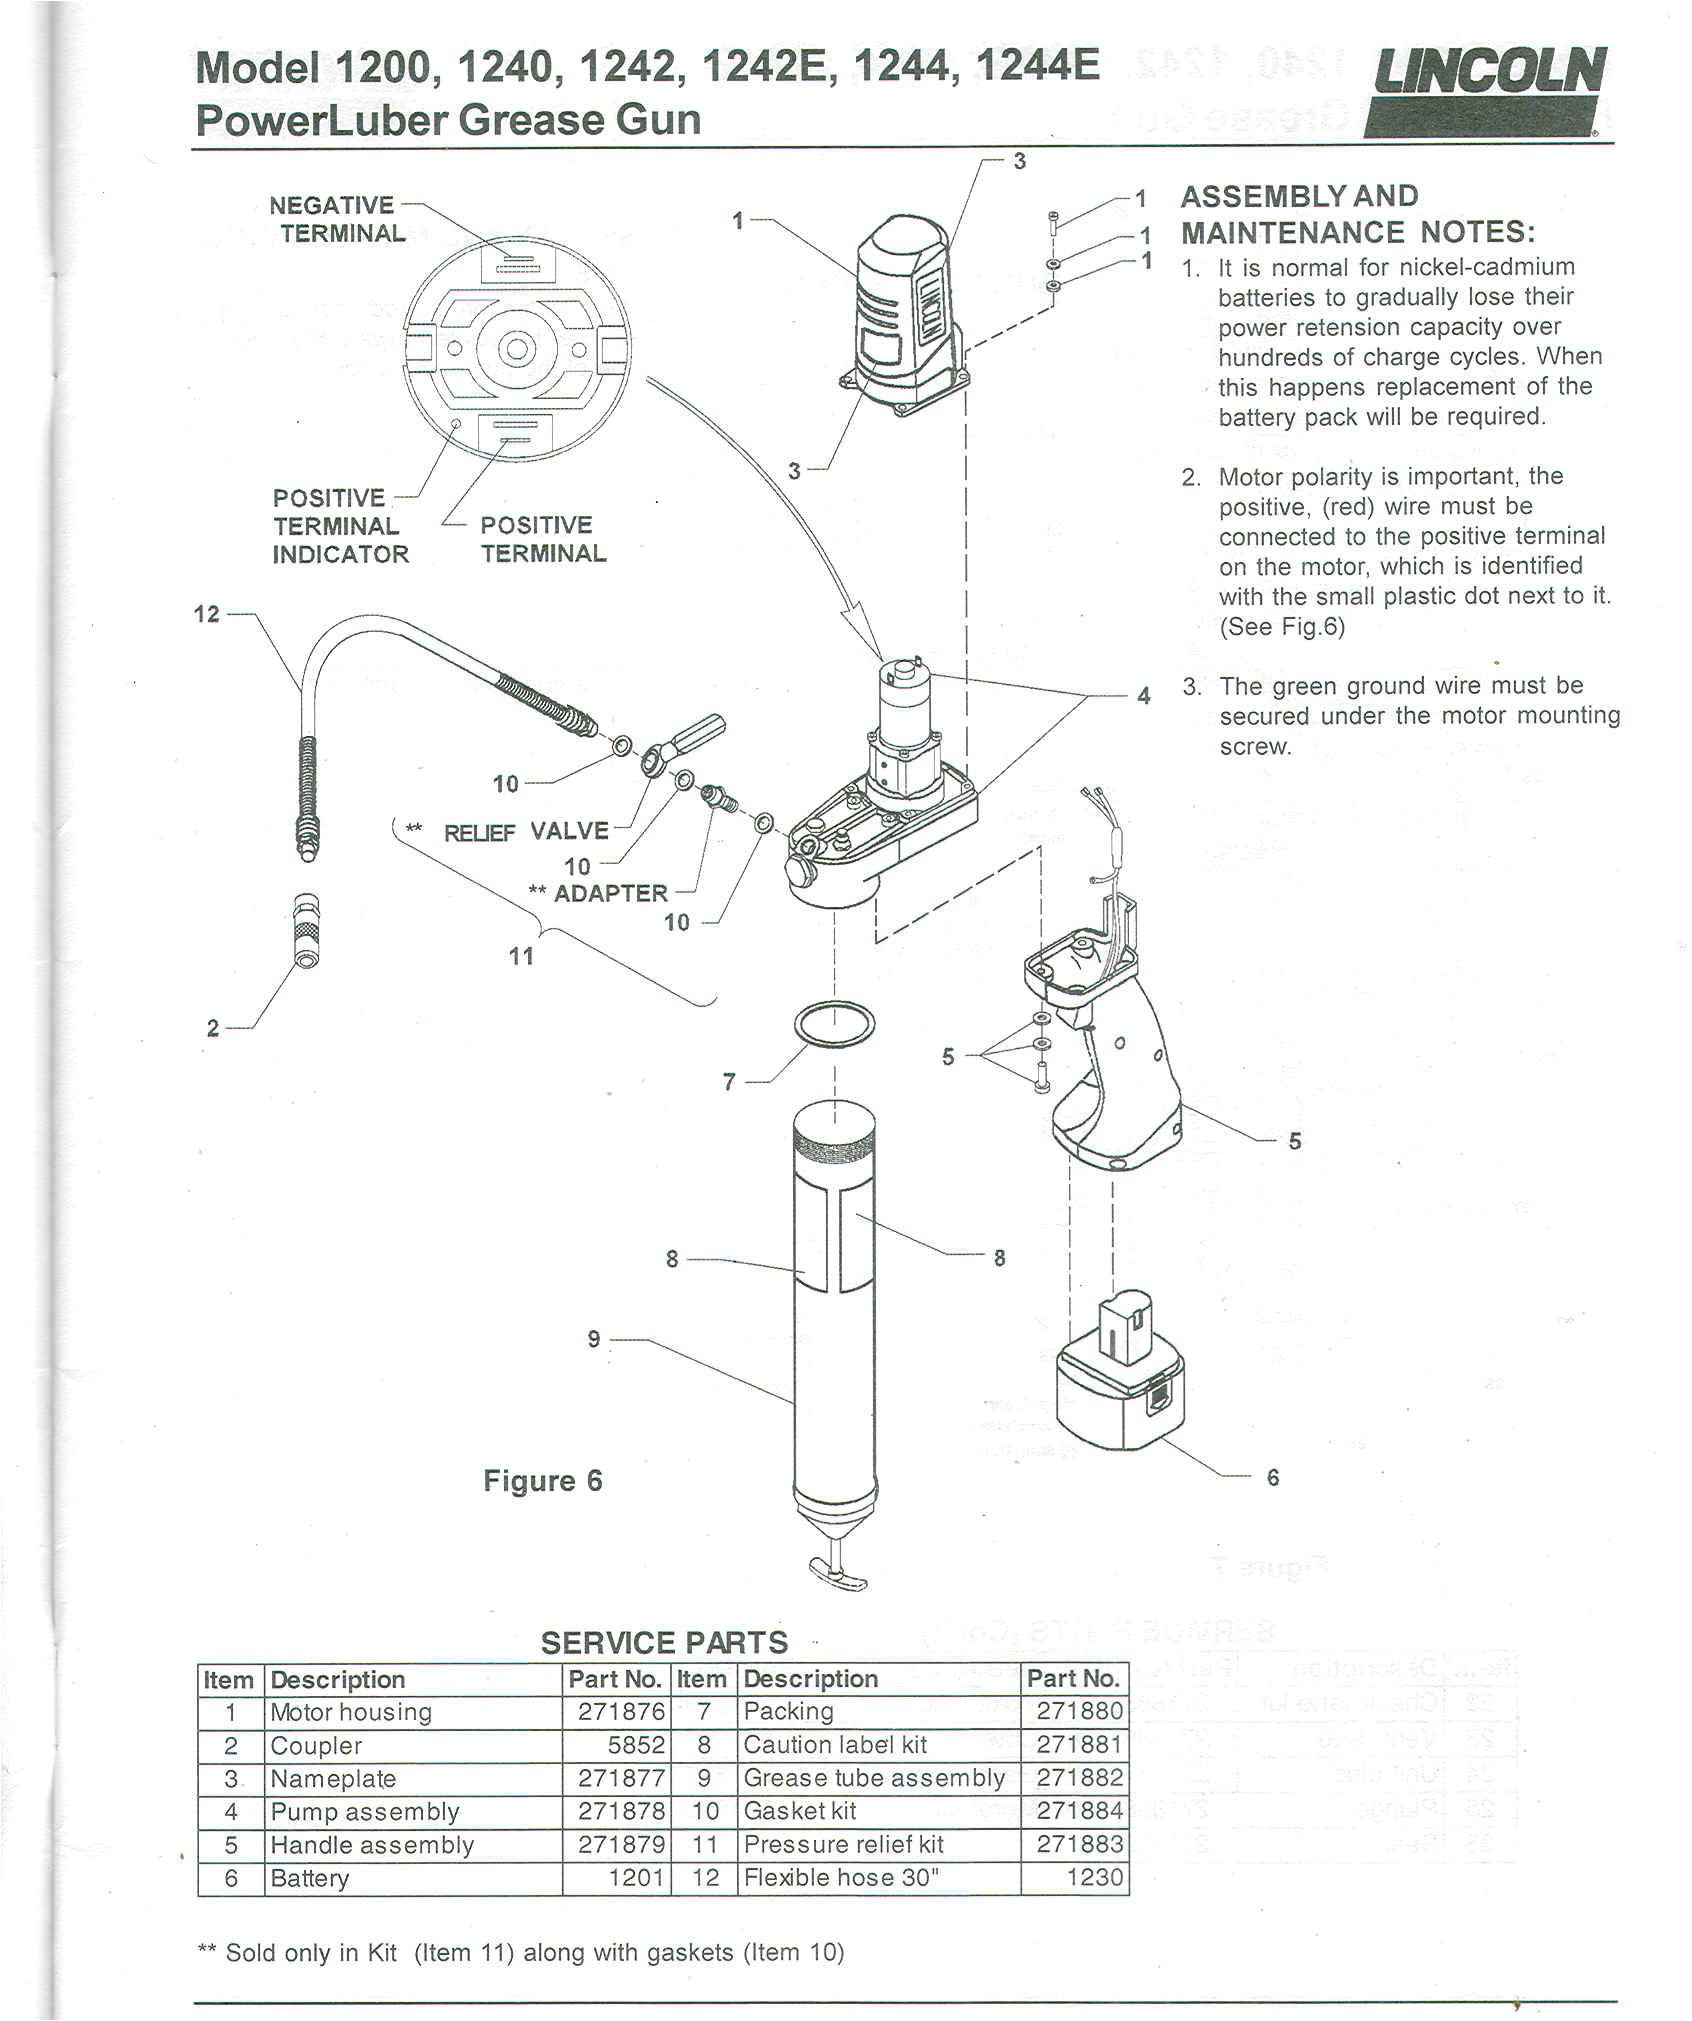 lincoln power luber 1200 series b lincoln power luber 1200 series b parts schematic lubrication equipment lincoln automotive automotive service